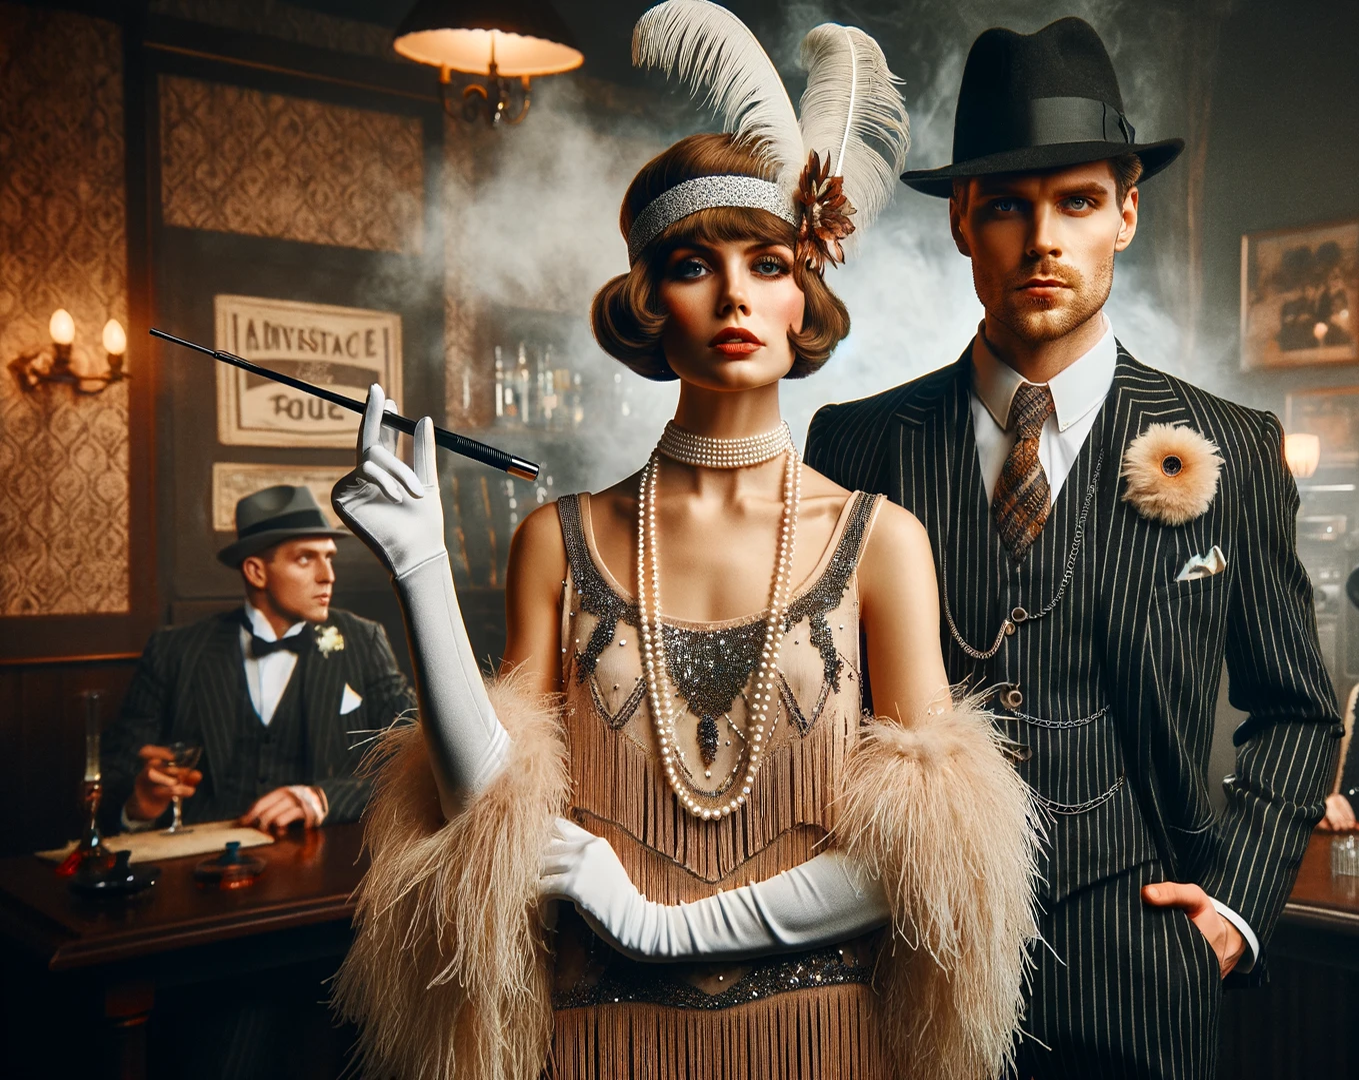 A flapper and a gangster in a speakeasy during prohibition in the roaring 20s